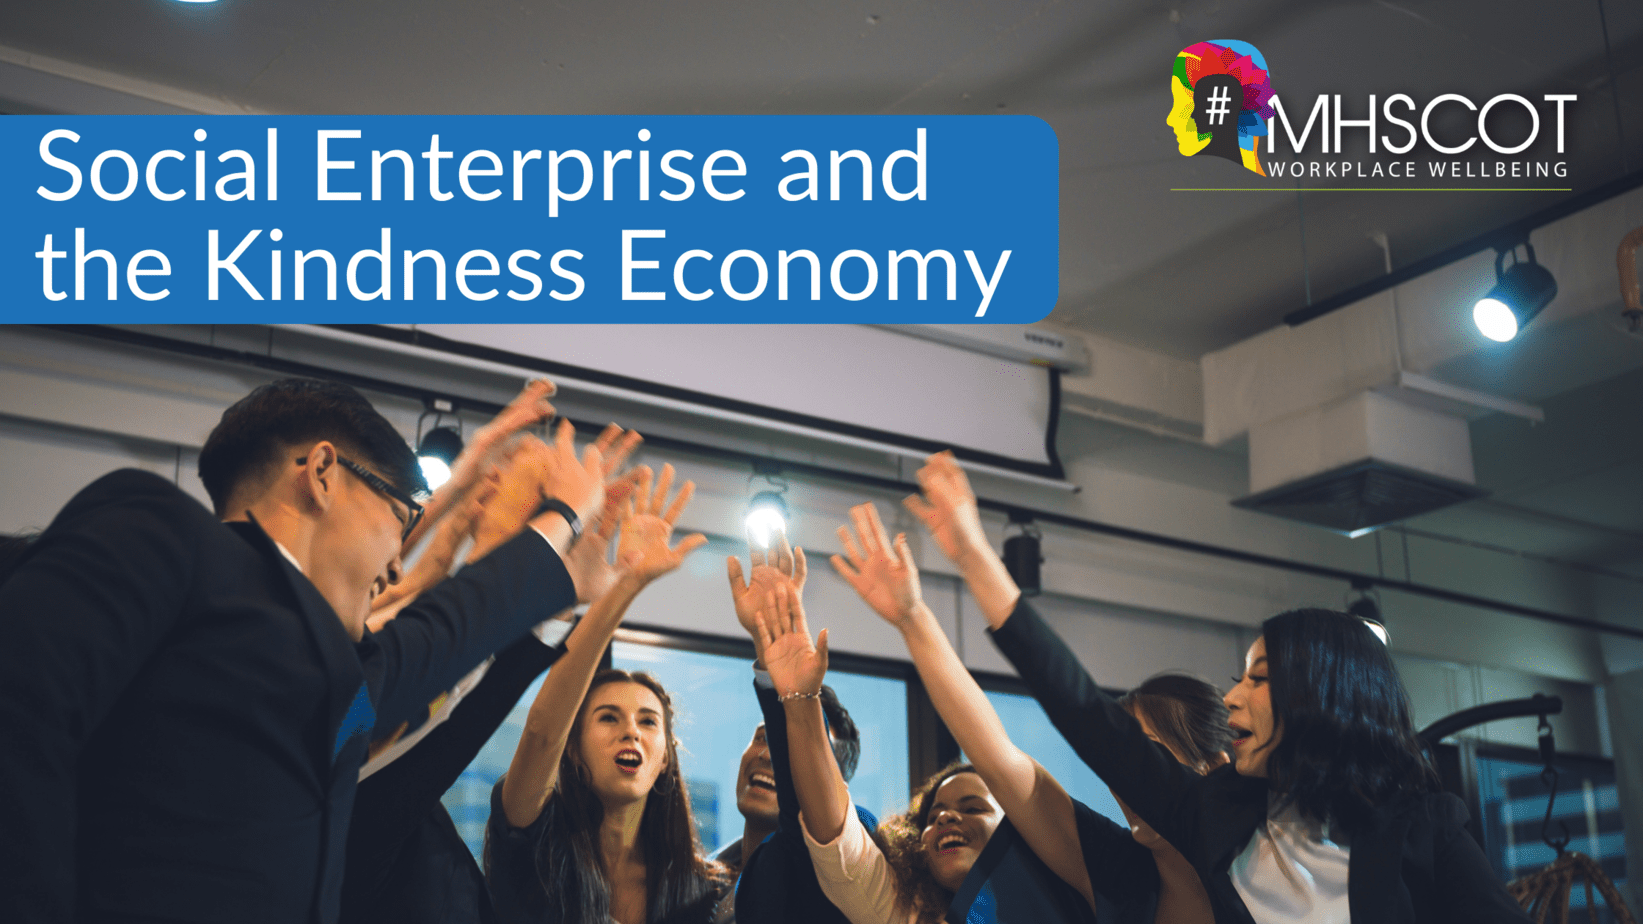 Social Enterprise and the Kindness Economy